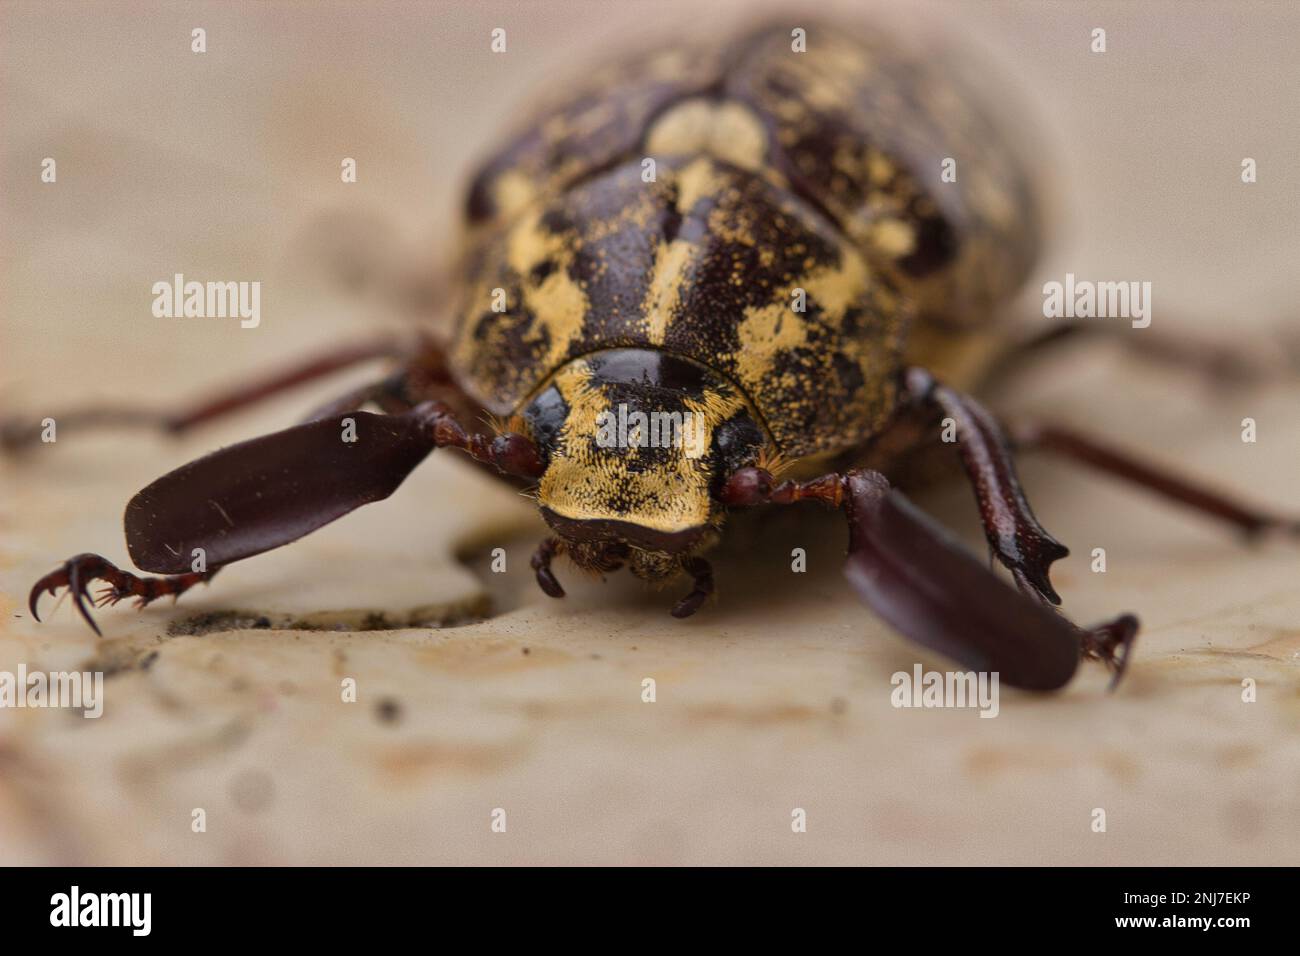 Macro image of a Turkish cockchafer, also Polyphylla fullo. Stock Photo